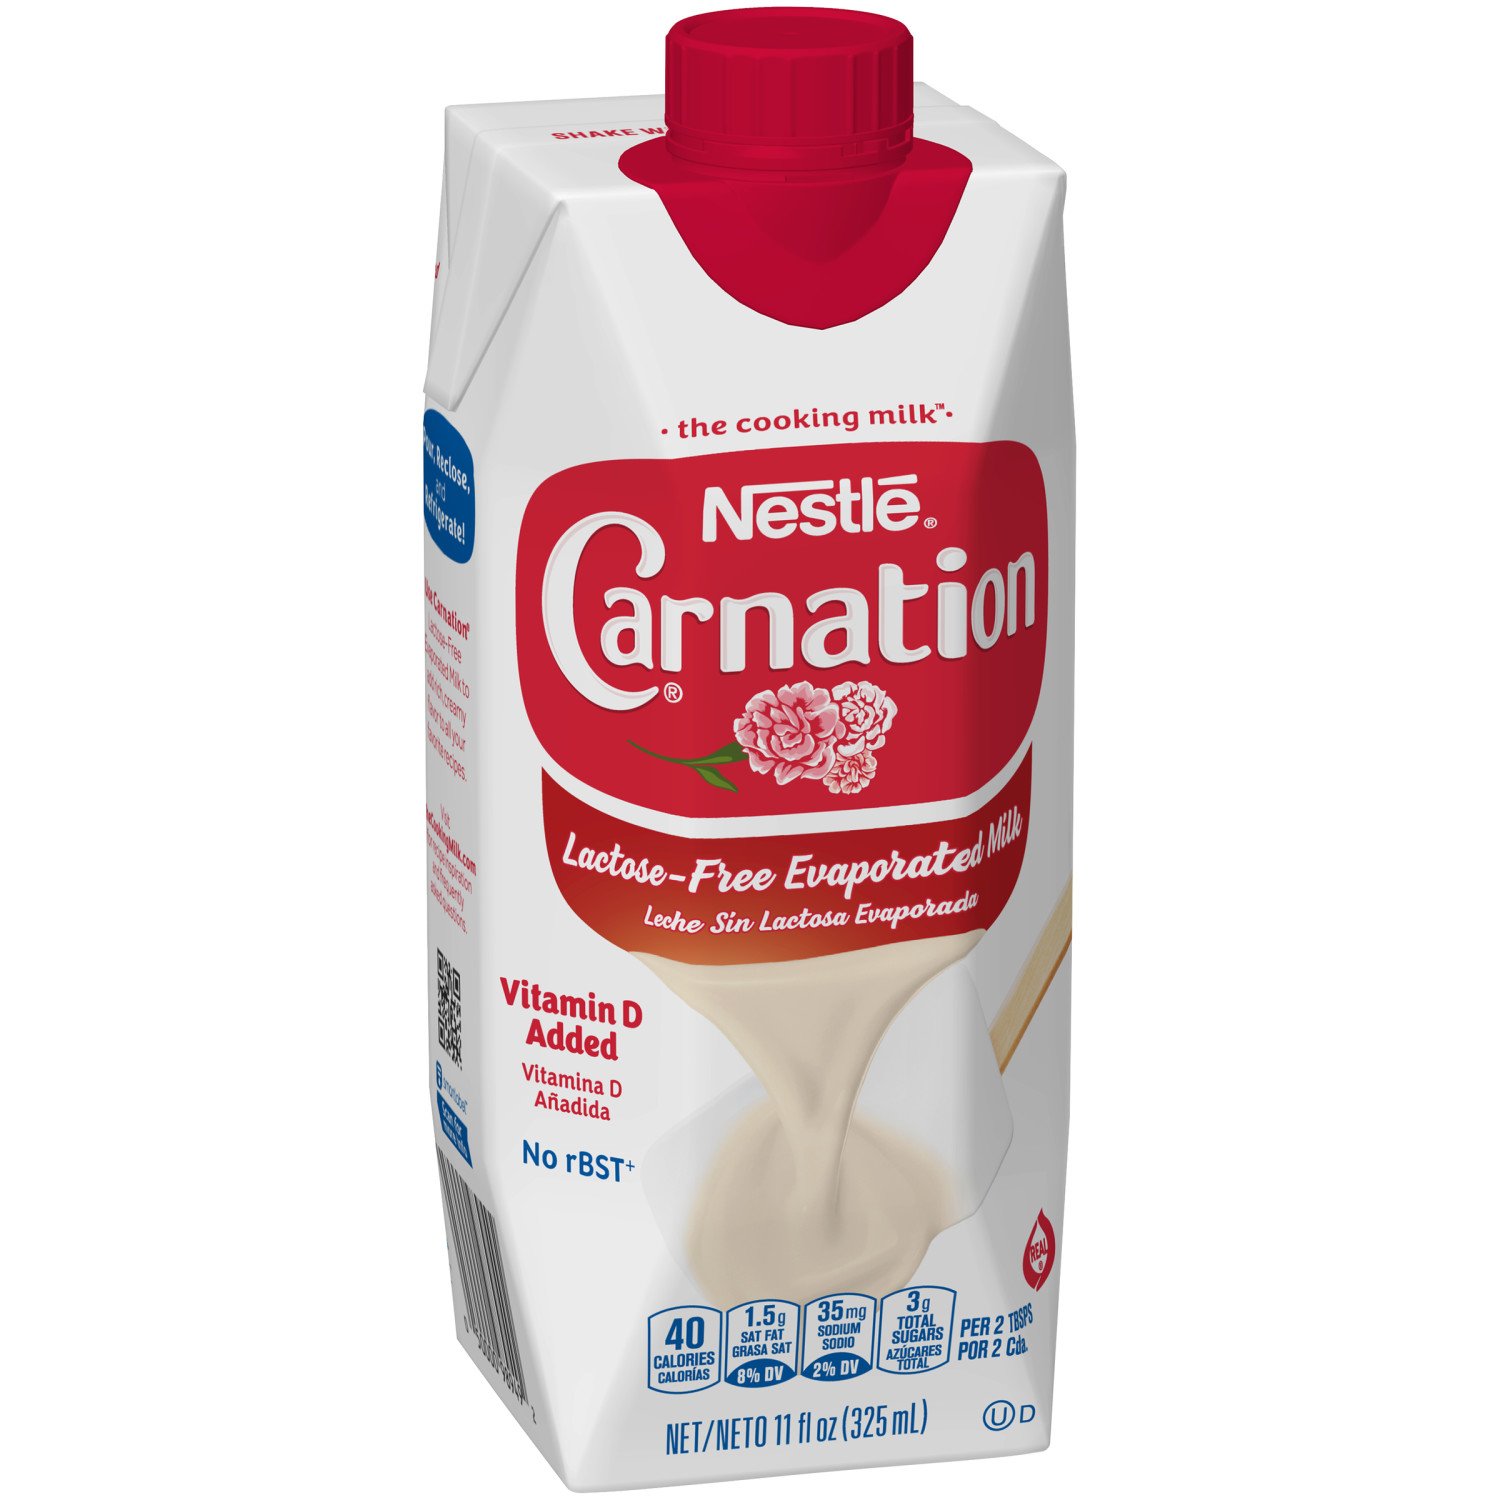 Nestle Carnation Lactose Free Evaporated Milk Shop Evaporated Milk At H E B,Log Cabin Quilt Layouts